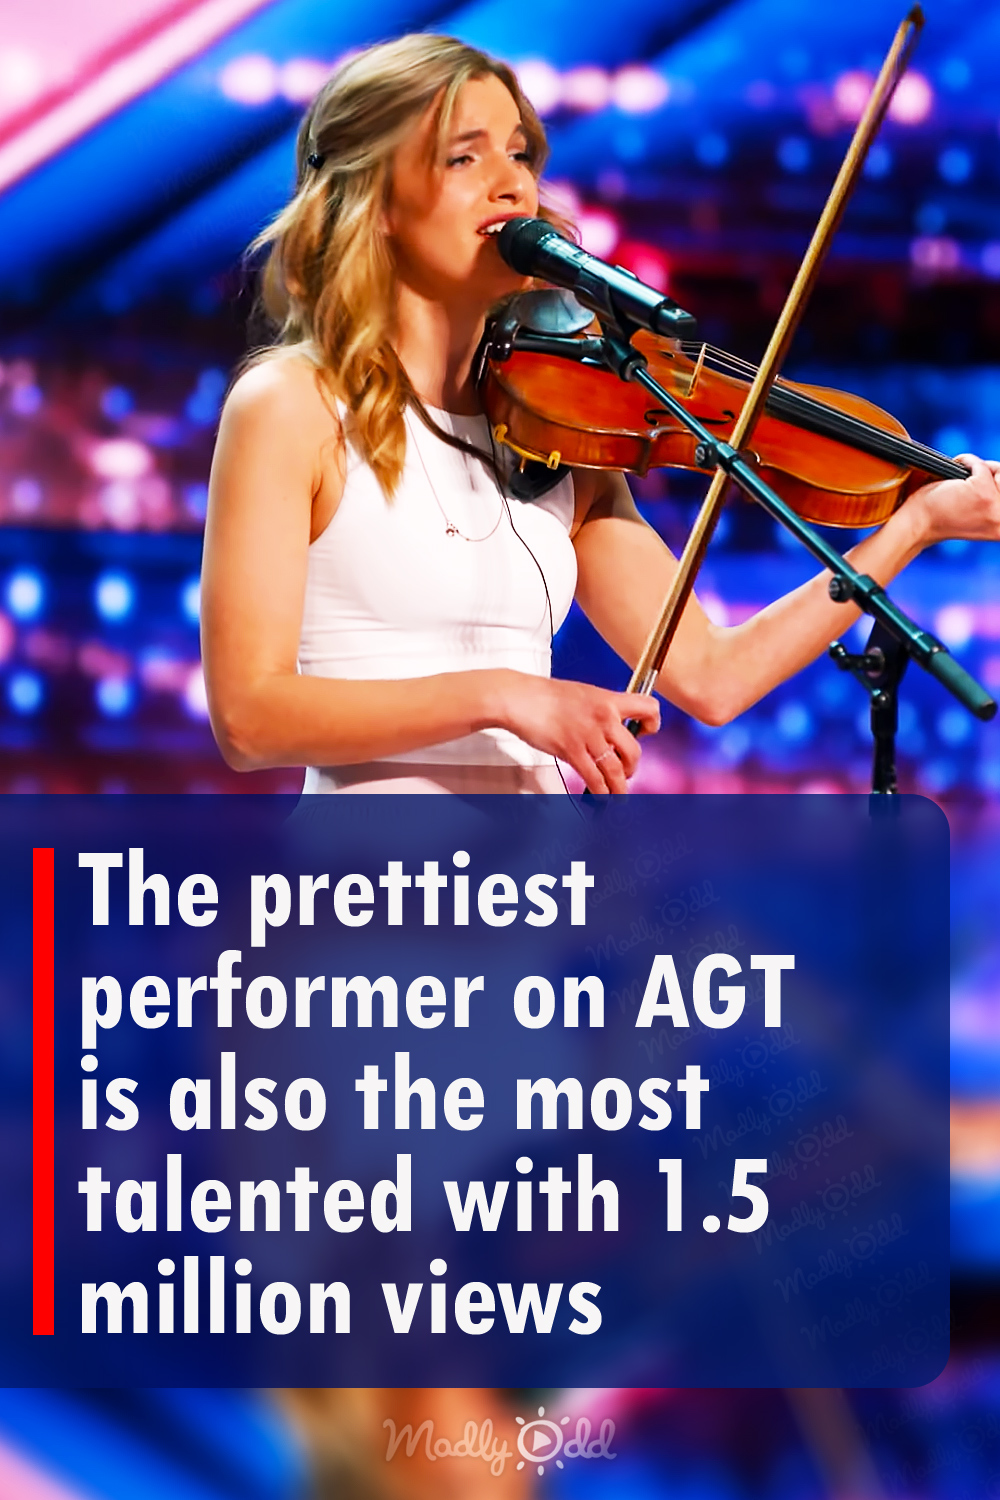 The prettiest performer on AGT is also the most talented with 1.5 million views